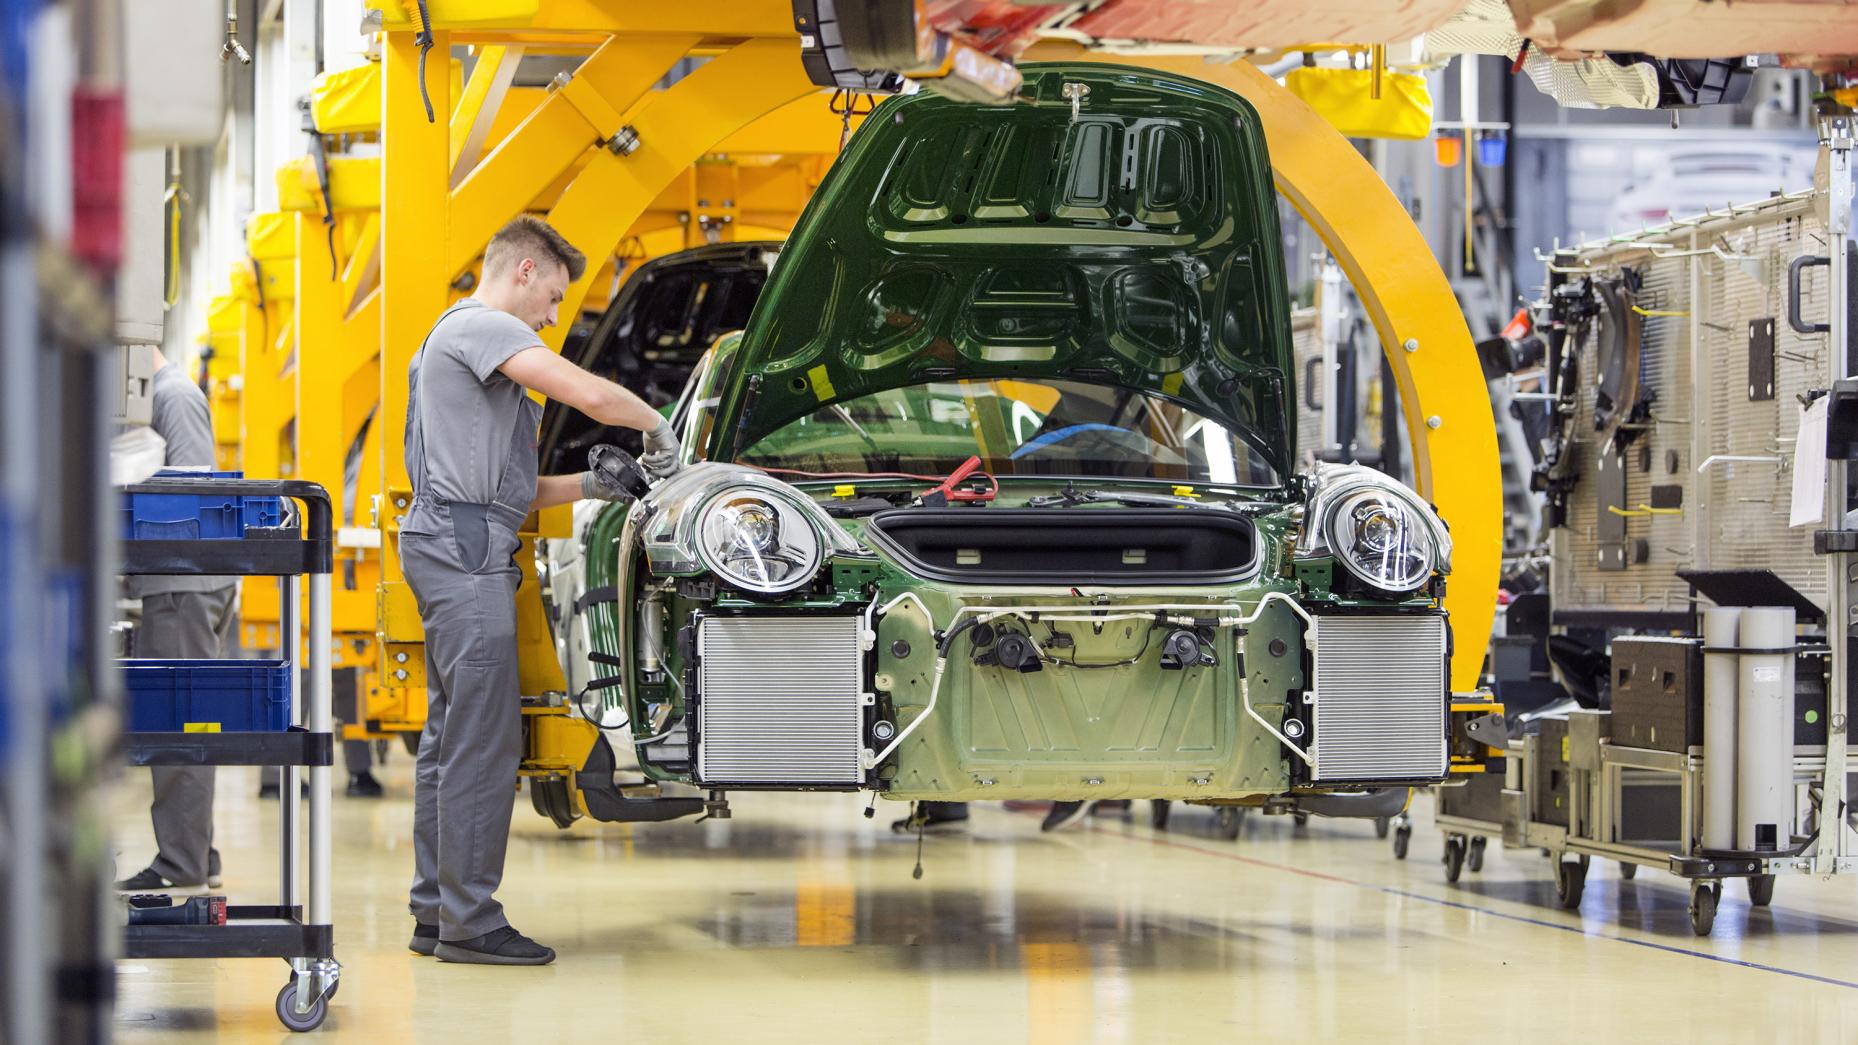 Where are Porsches built, and how many does it build a year?